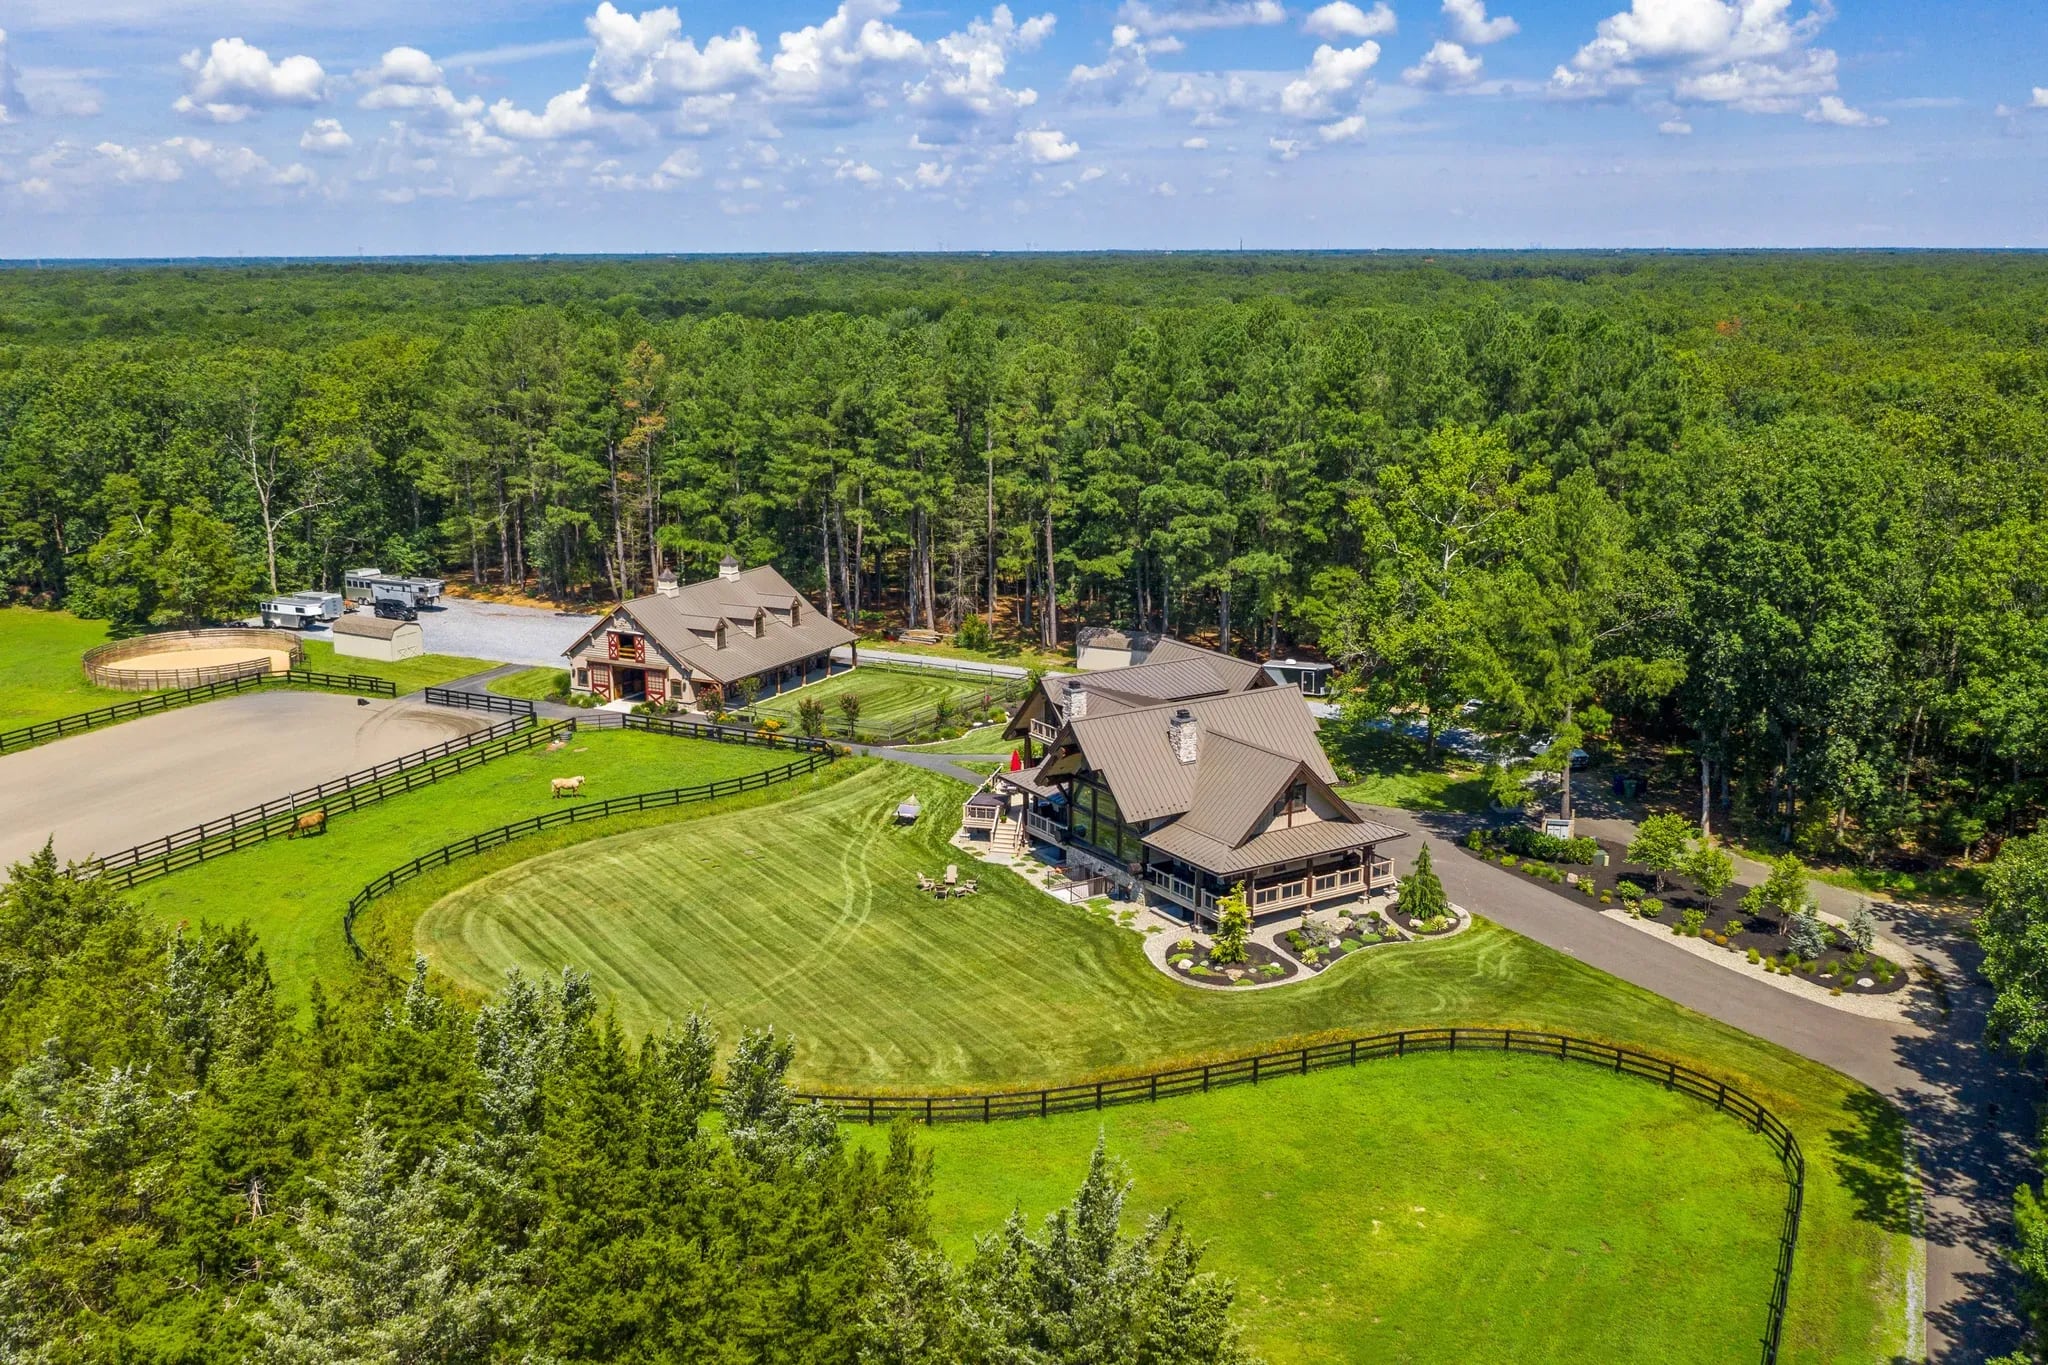 An aerial view shows just part of the bucolic 31-acre property that the Rodriguezes bought in 2016. "Everybody that comes back here says, 'I don't feel like I'm in New Jersey,'" says Joe.